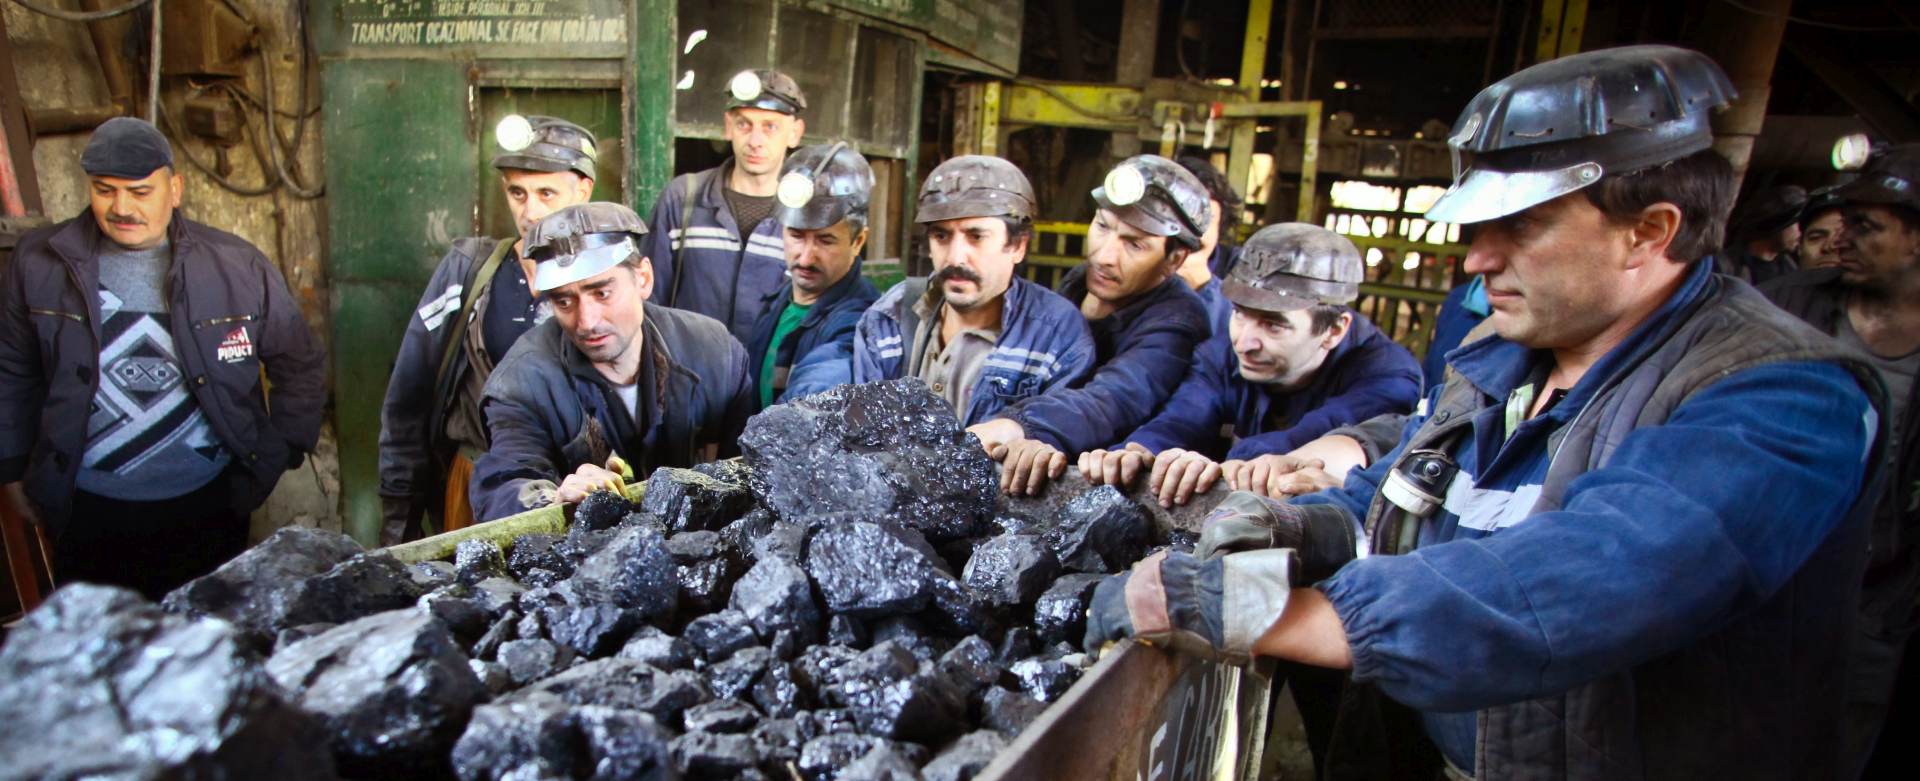 epa05003308 Coal miners push the last mine truck filled with coal extracted from Romania's deepest and oldest coal mine stands on the tracks of the mine in Petrila, some 400 kilometers west of Bucharest, Romania, 30 October 2015. The mine which reaches a depth of some 1,000 meters and was founded 156 years ago, was closed on 30 October according to some international agreements, considering it an uncompetitive mine. Media reports say that an initiative launched a petition to preserve the mine dubbed the 'Academy of Romanian Mining' because of its complexity as a heritage site for the legacy of the Romanian industrial era.  EPA/MIHAI BARBU